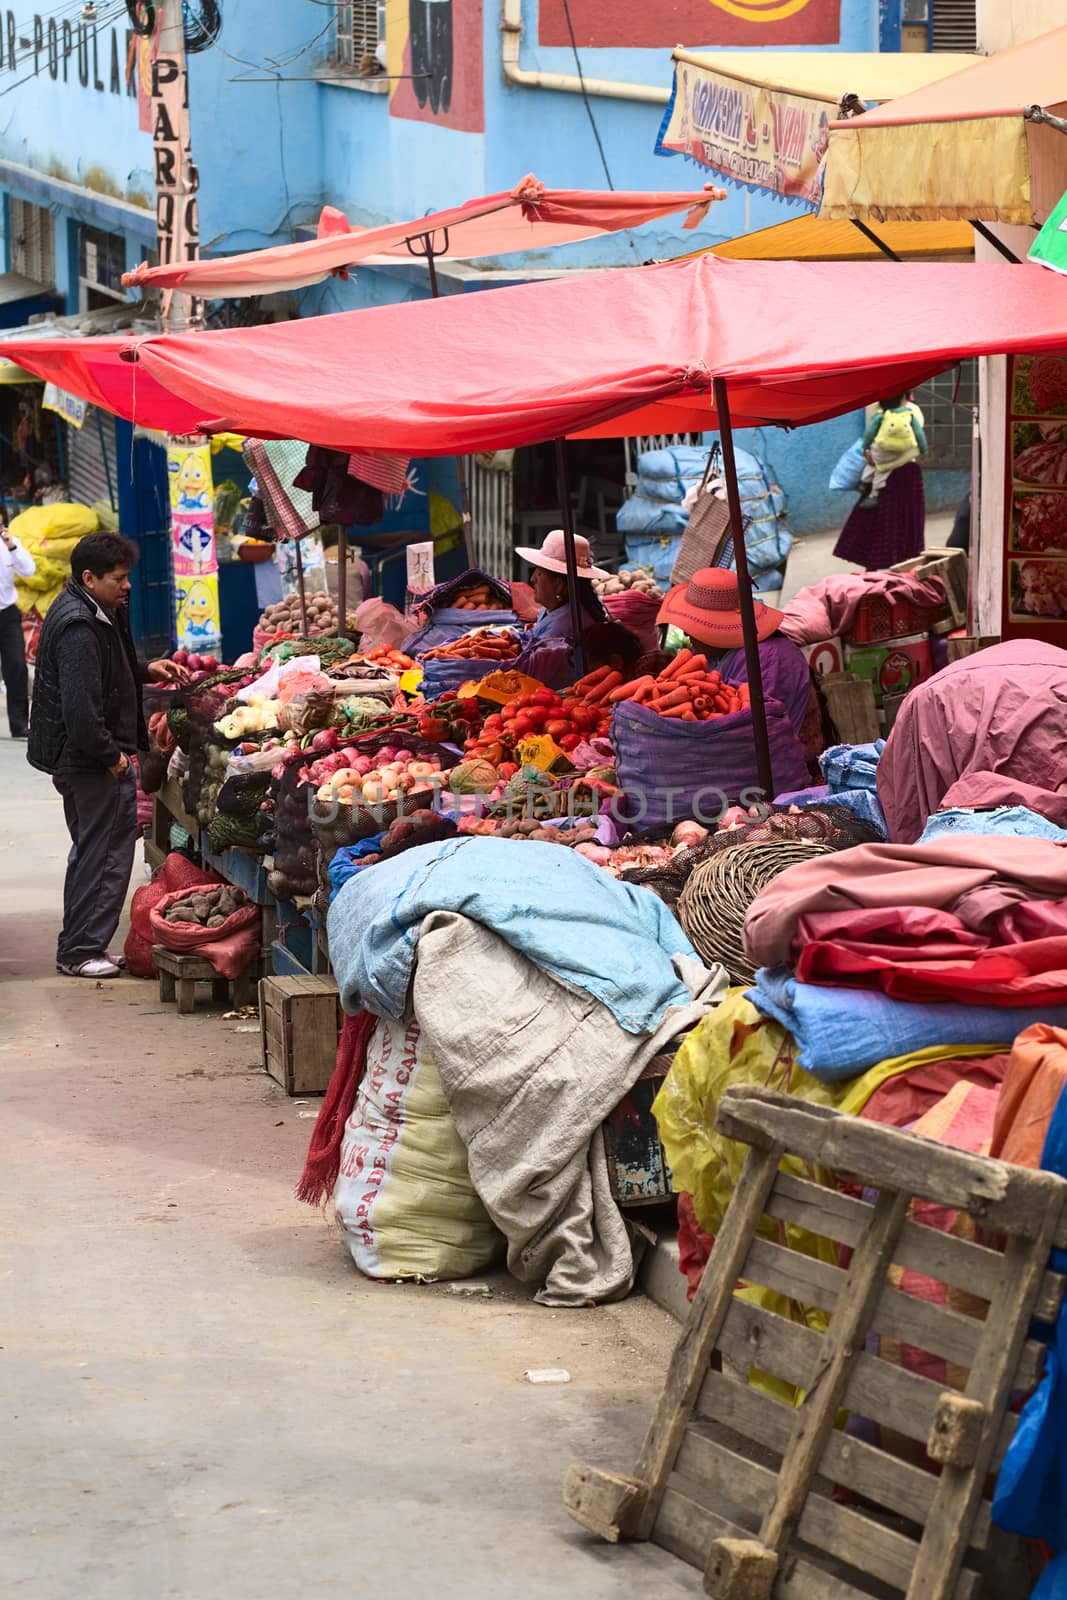 Vegetable Stands in La Paz, Bolivia by sven